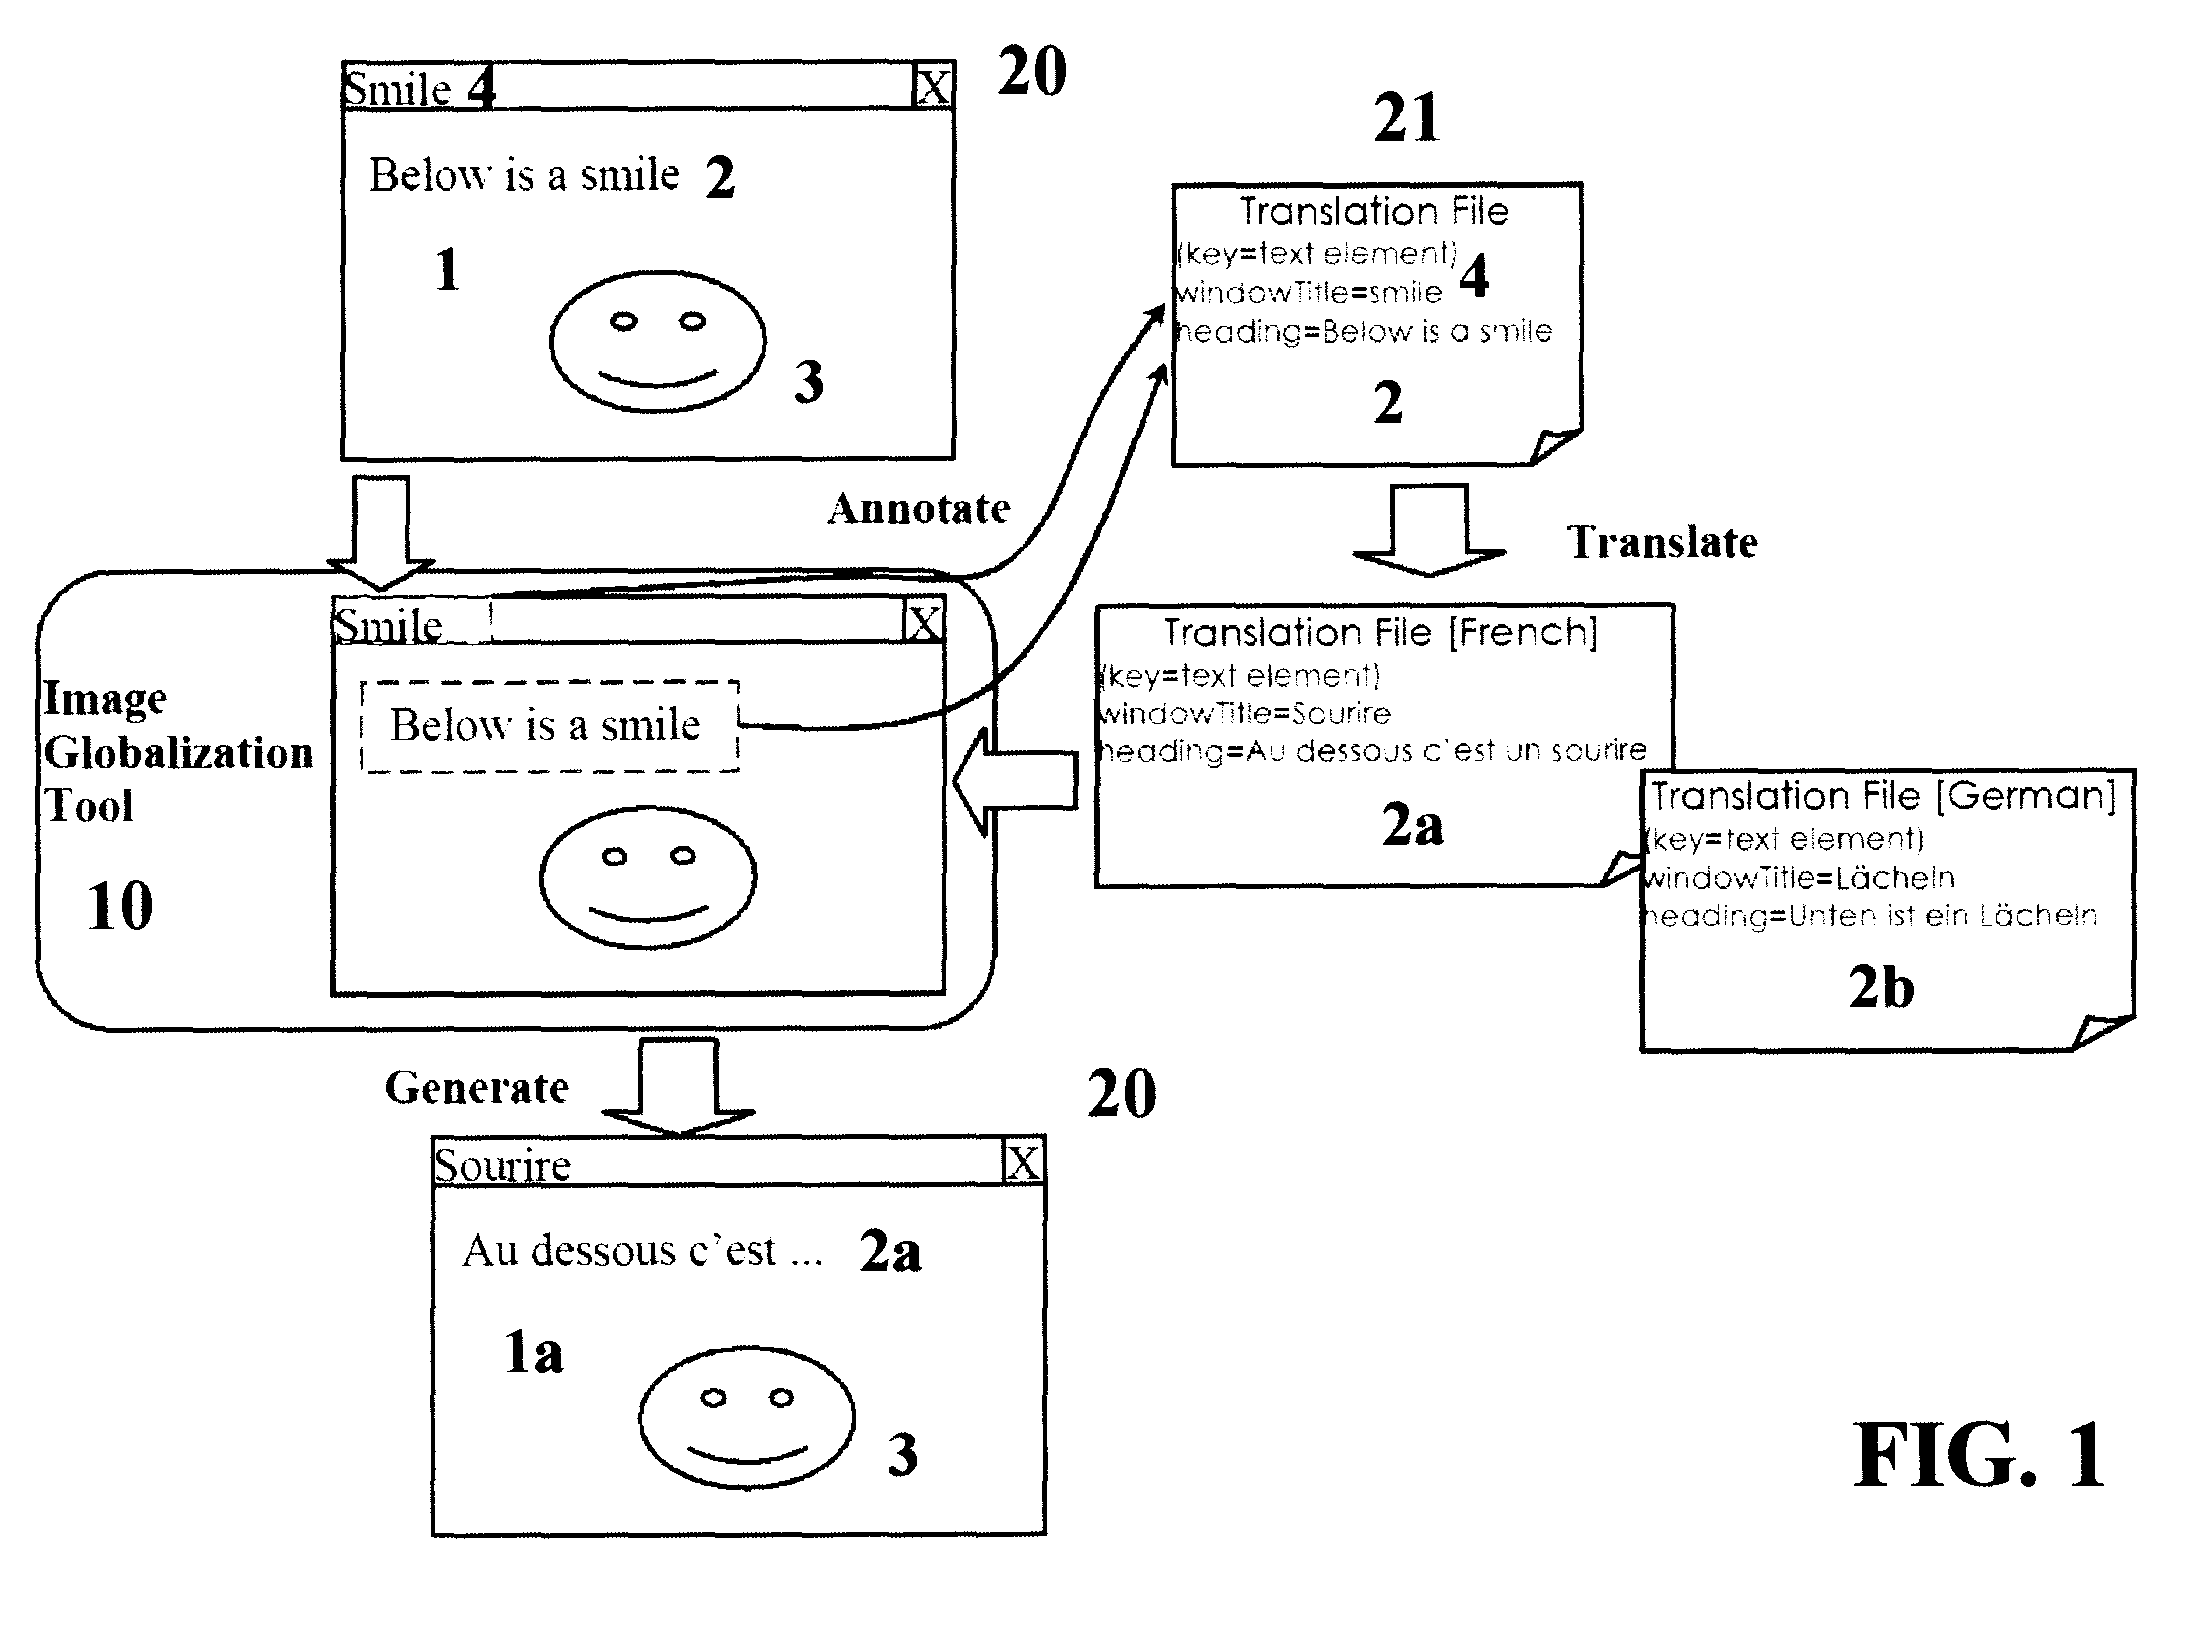 Method and system for using image globalization in dynamic text generation and manipulation